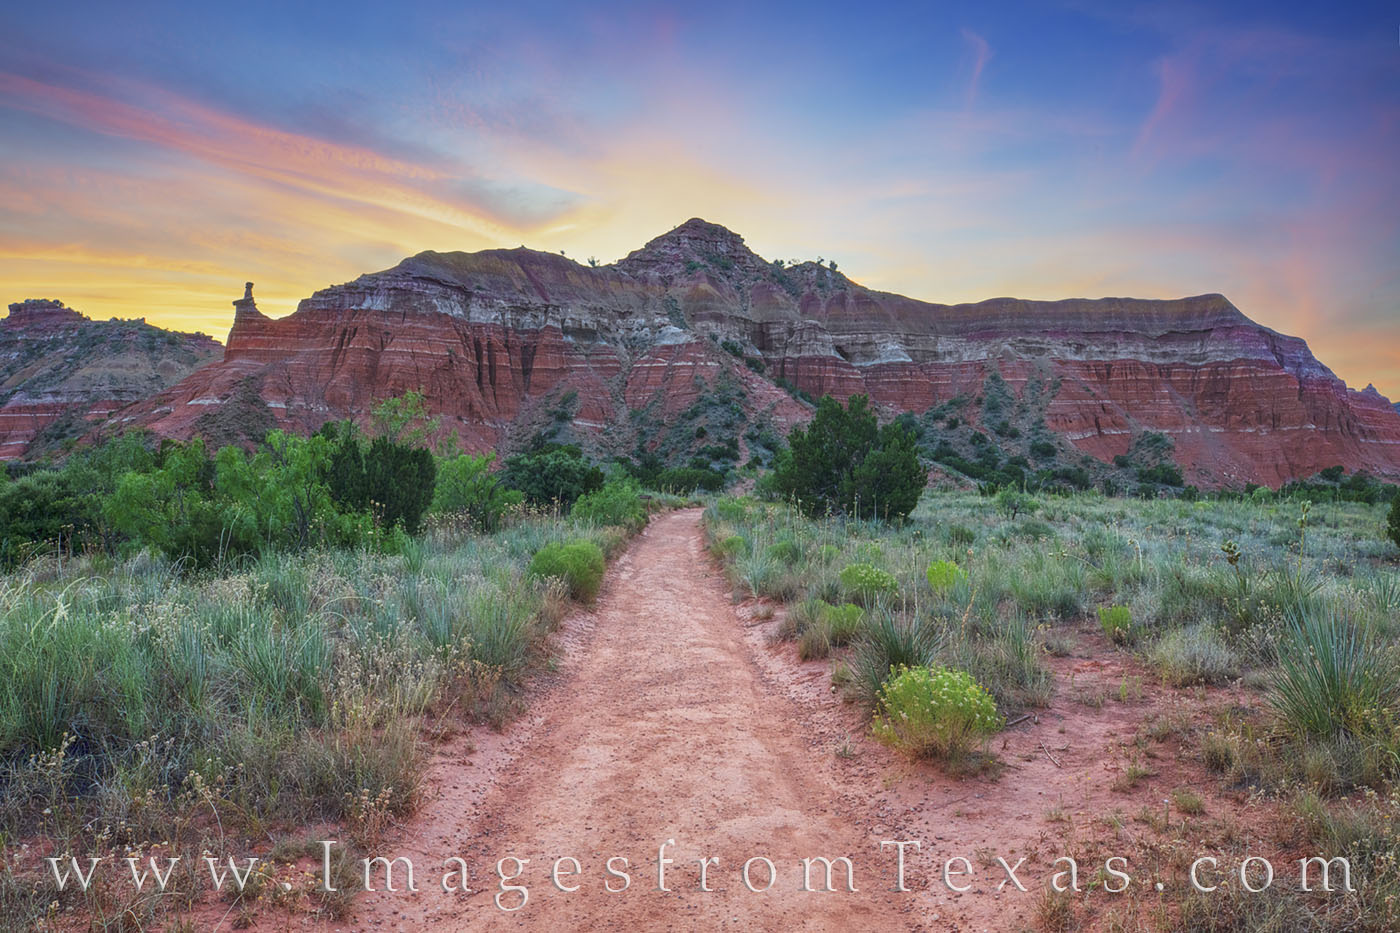 The Lighthouse Trail leads you up to and around the iconic Capitol Peak in Palo Duro Canyon. Taken here at sunset, the colors...